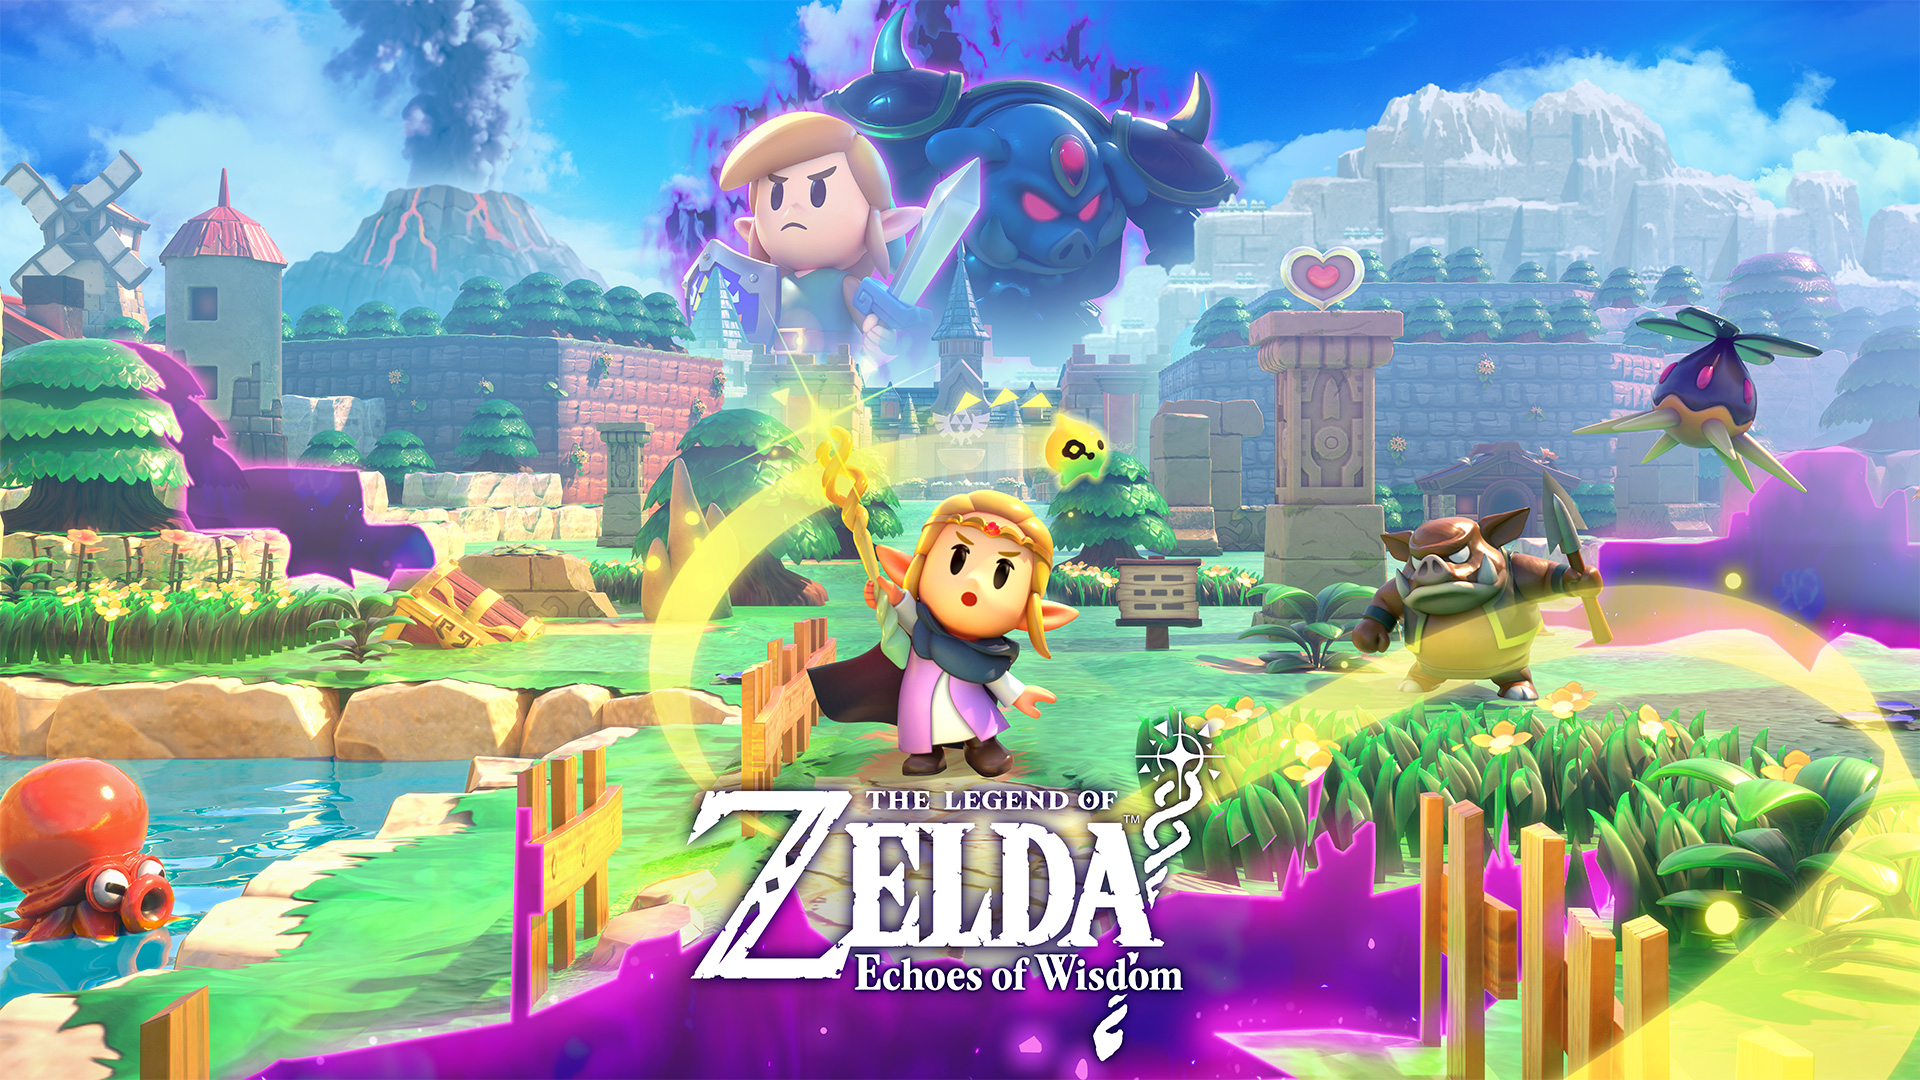 The key art for The Legend of Zelda: Echoes of Wisdom.